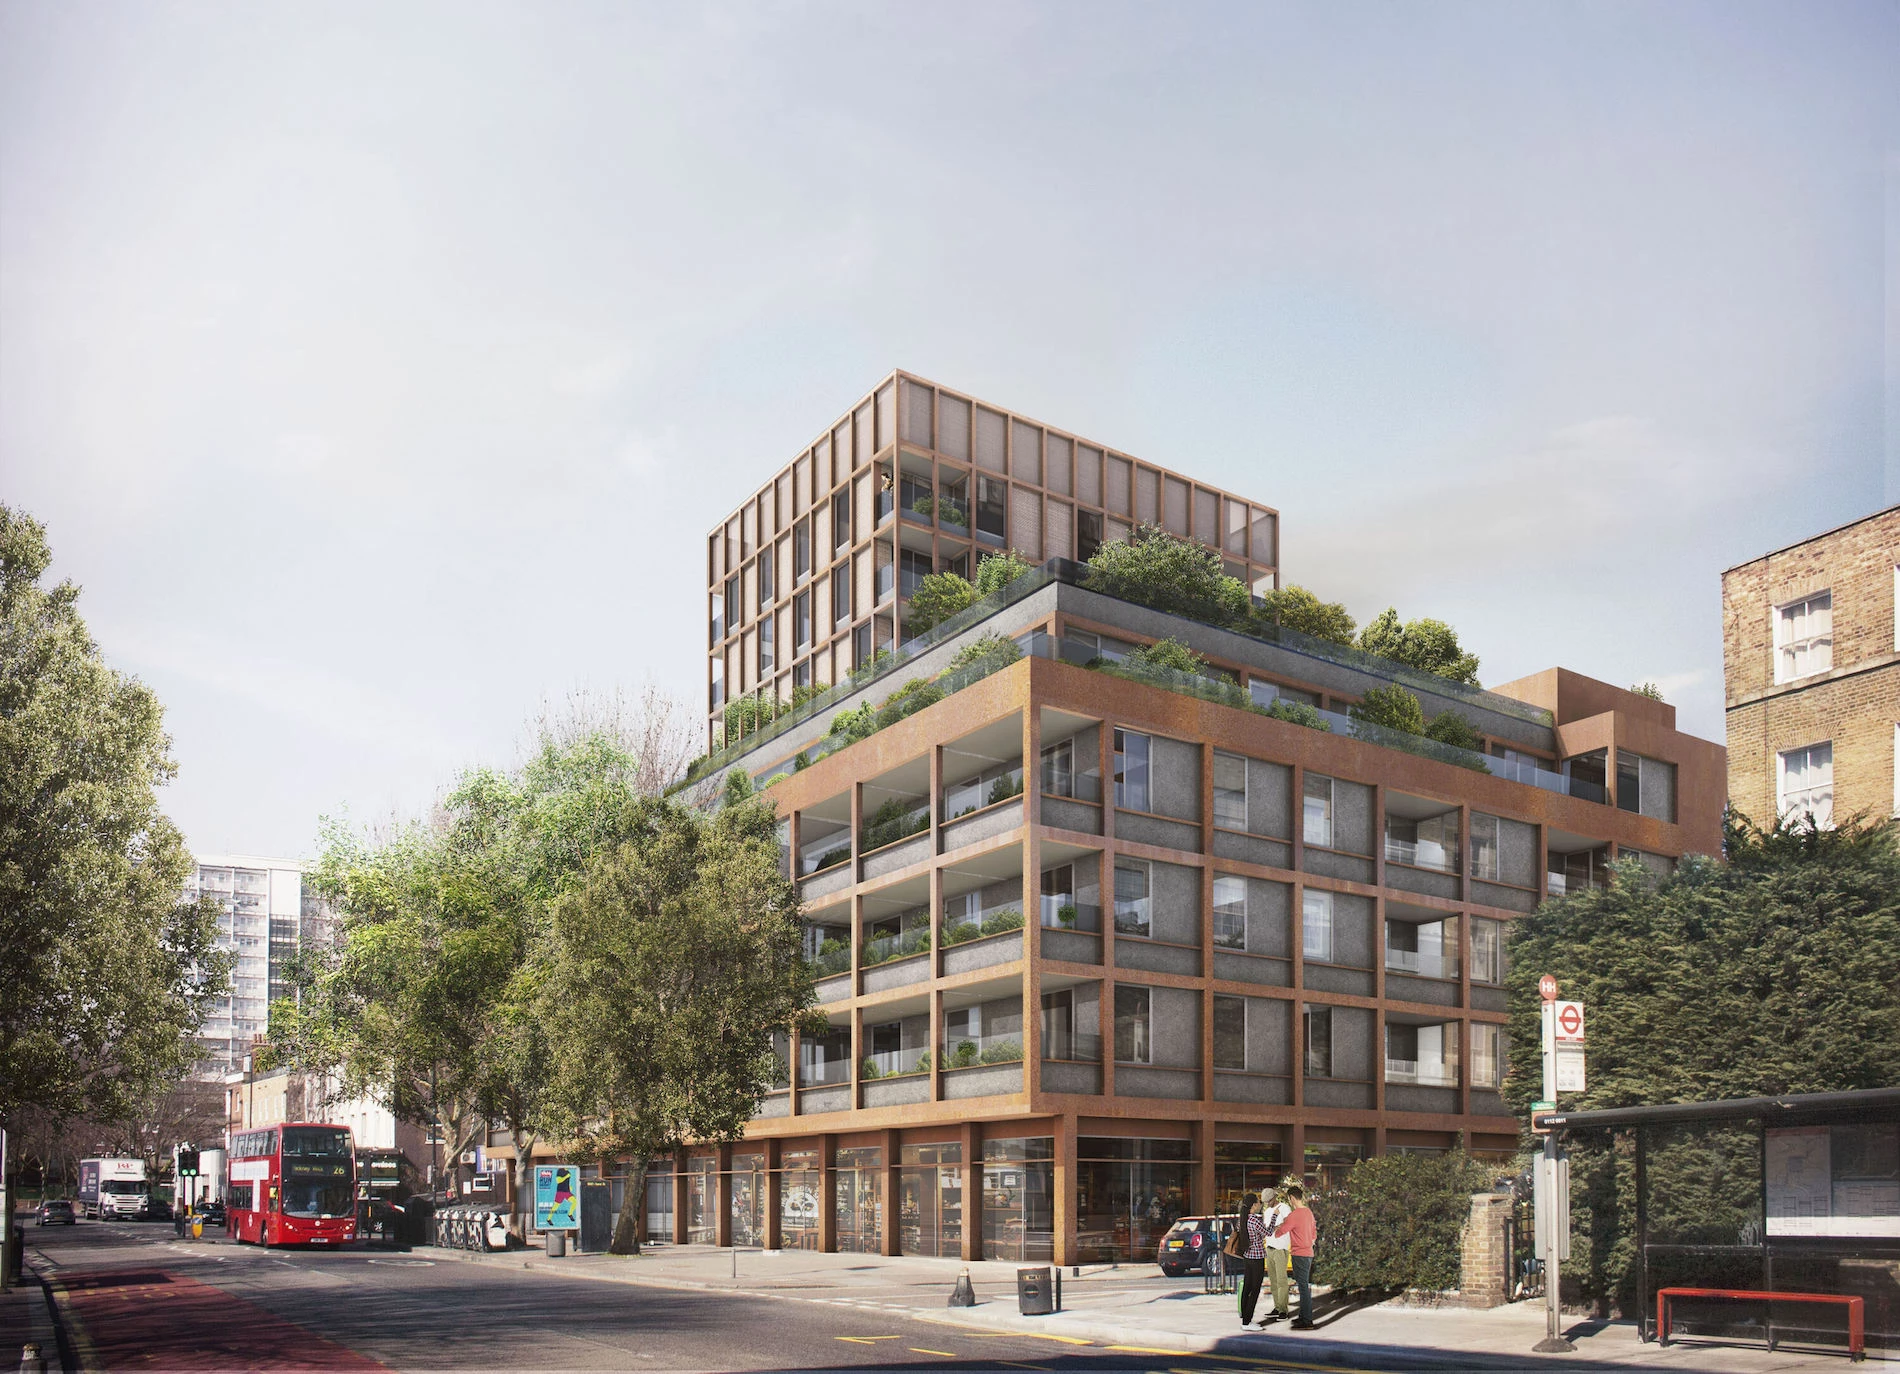 A CGI of the 83 home mixed-use development on Hackney Road.